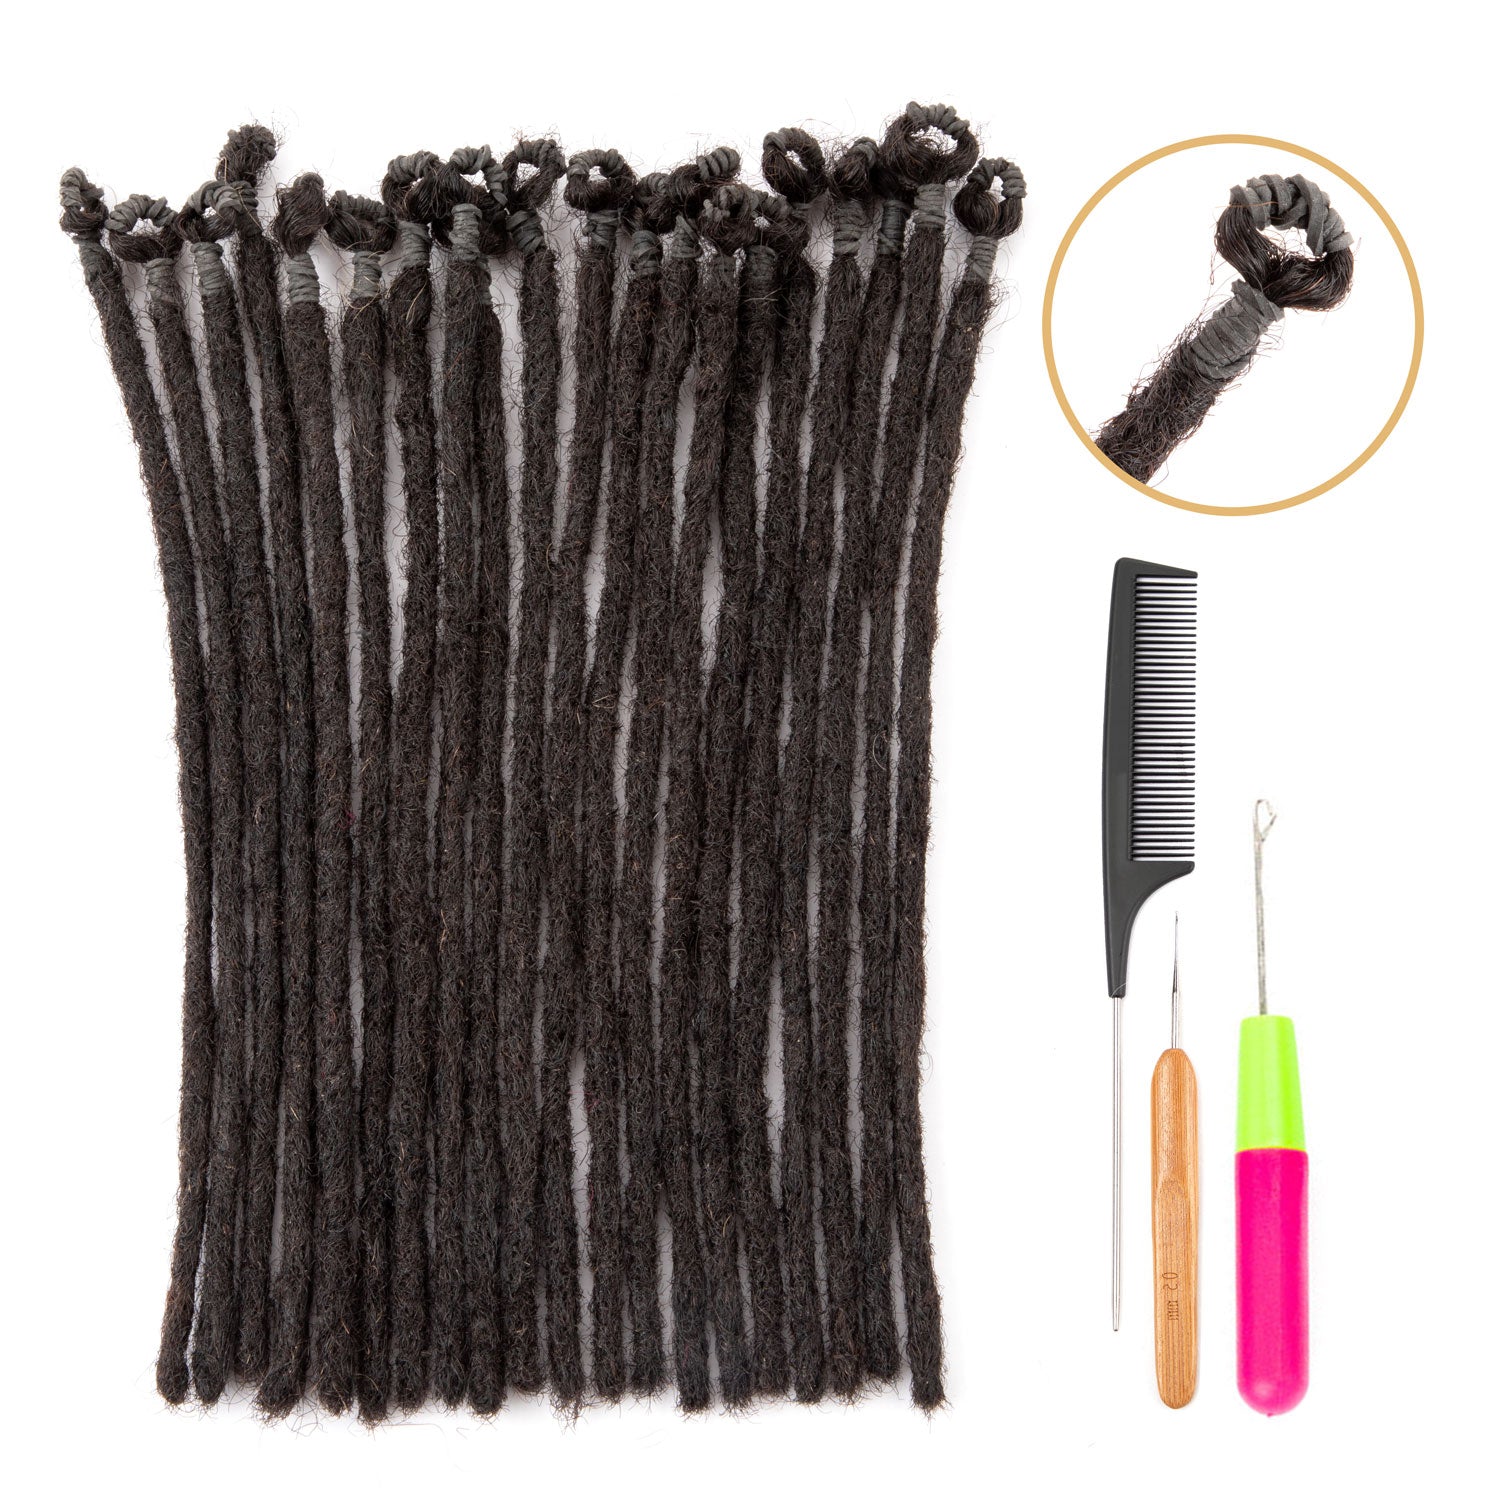 Pre-looped Top Dreadlocks Extensions Human Hair Permanent Dreads for Retwist Natural Color 0.4cm Thickness  (6-18 Inch)